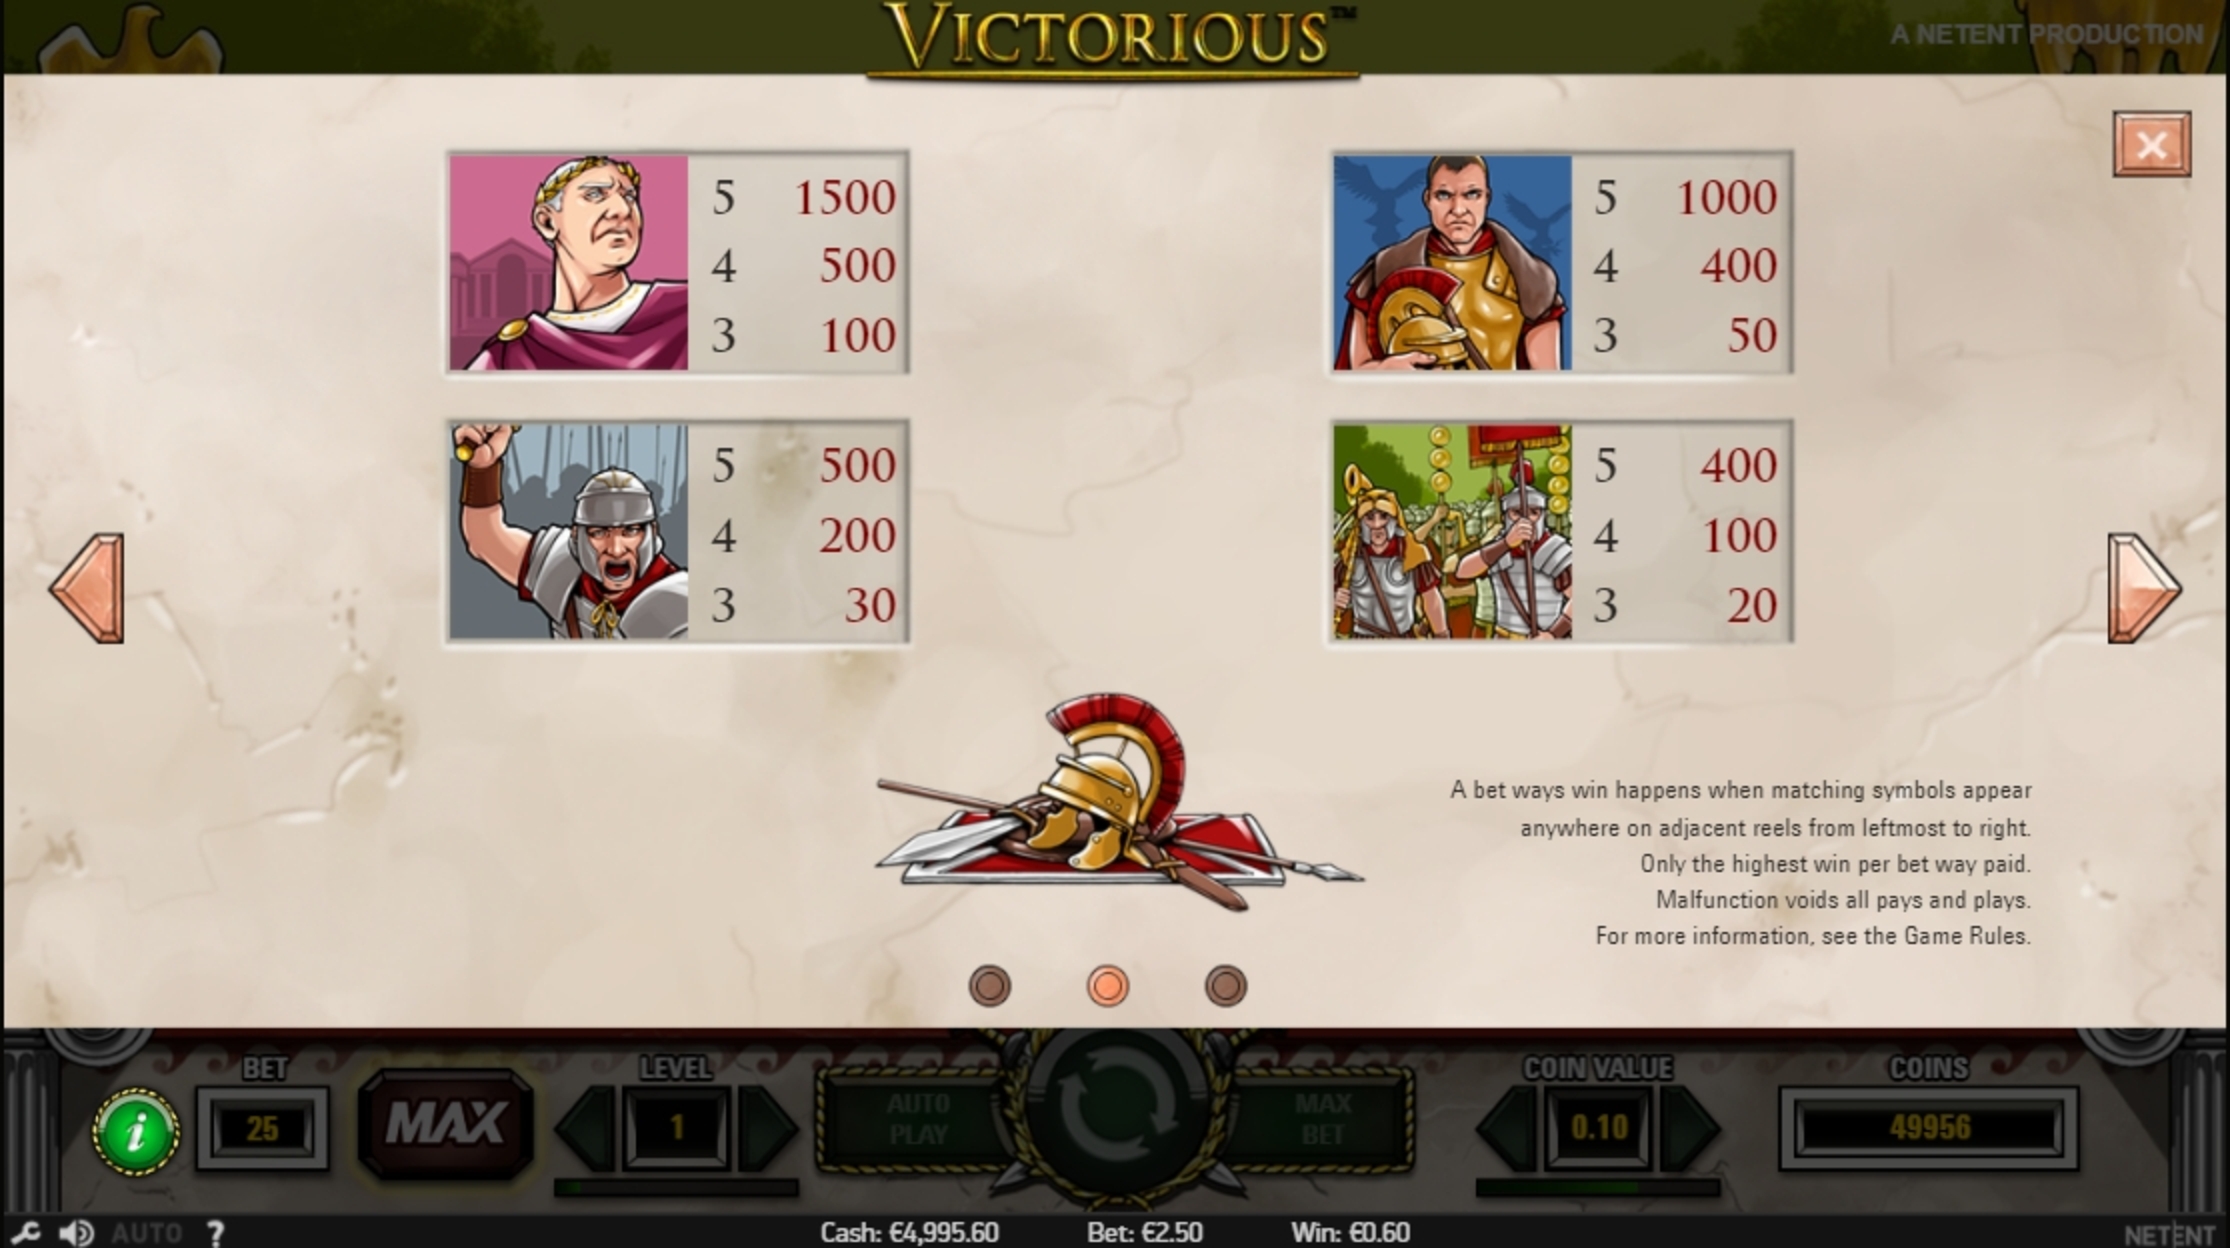 Info of Victorious Slot Game by NetEnt